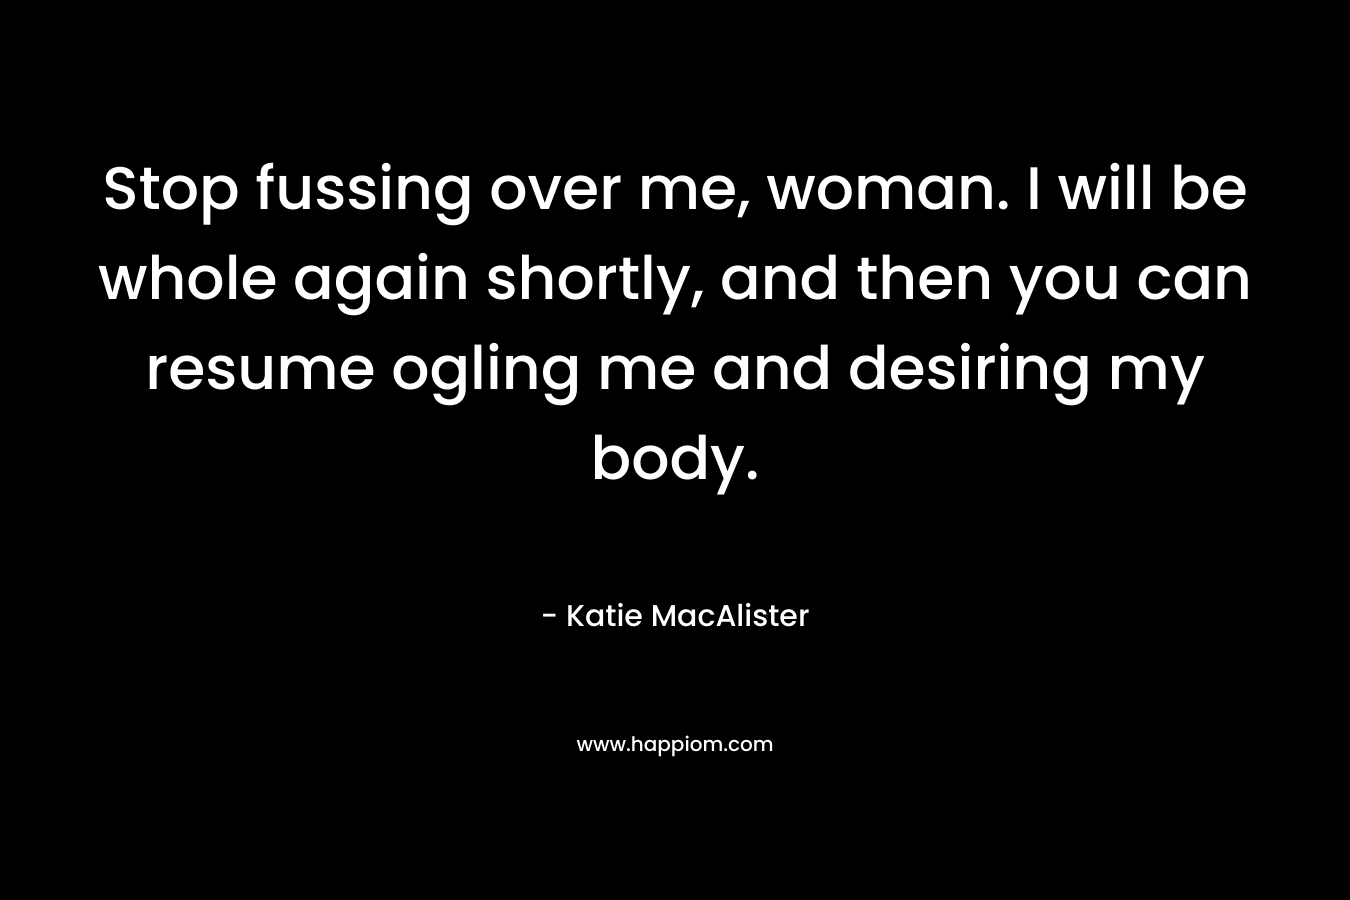 Stop fussing over me, woman. I will be whole again shortly, and then you can resume ogling me and desiring my body. – Katie MacAlister